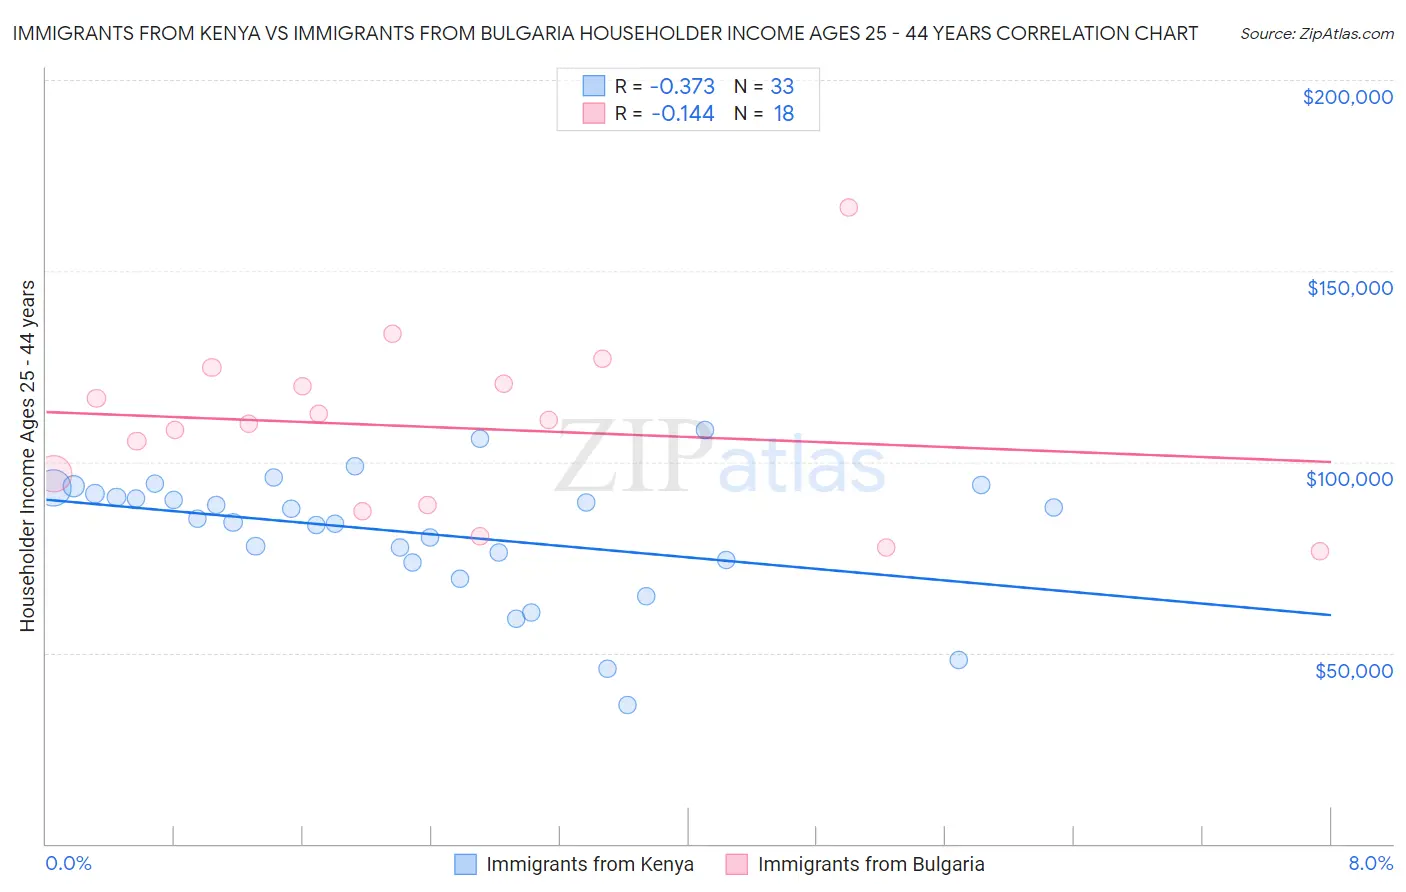 Immigrants from Kenya vs Immigrants from Bulgaria Householder Income Ages 25 - 44 years